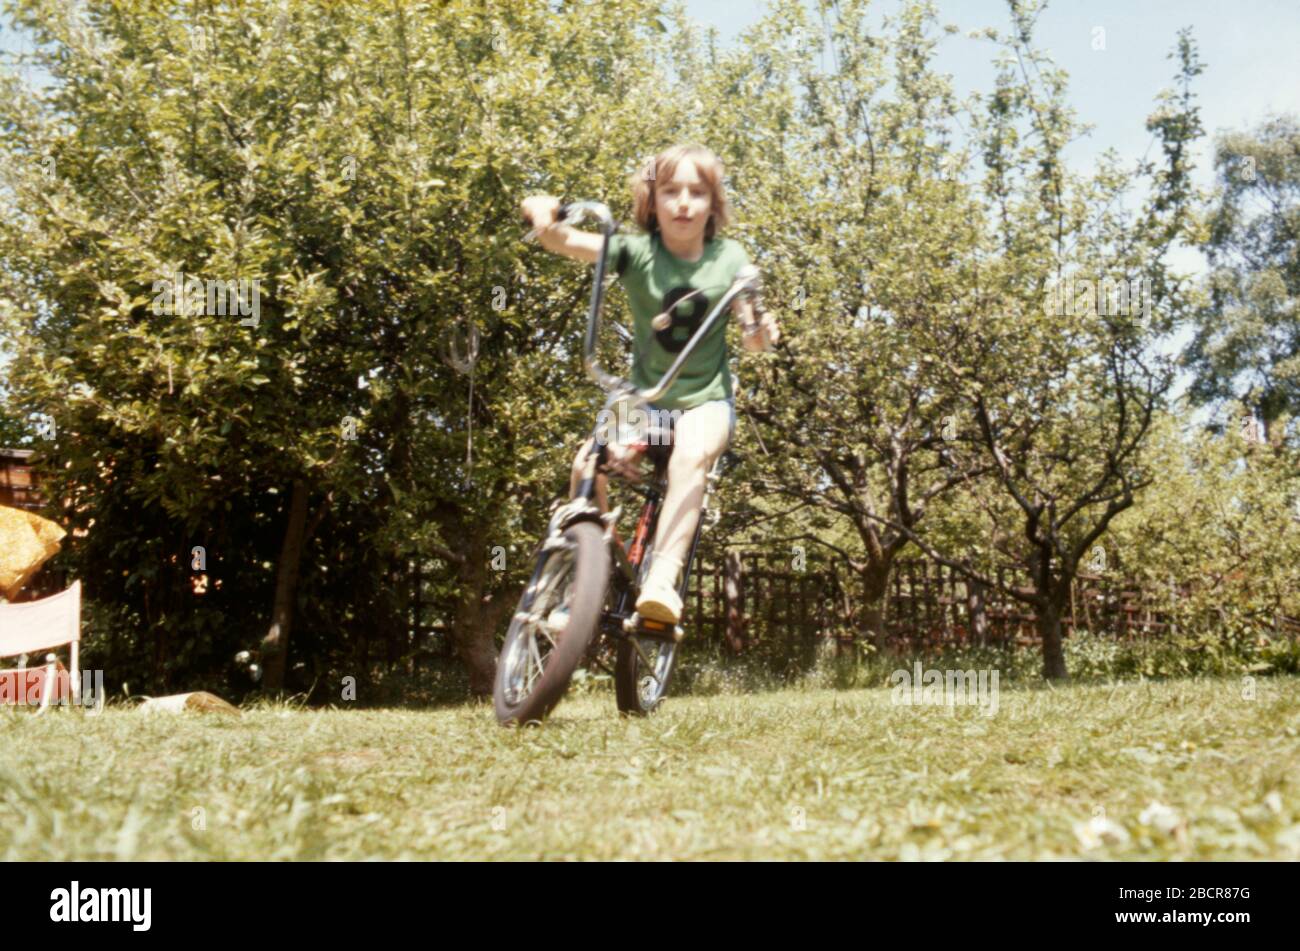 A boy riding his Raleigh Chopper bike in the back garden of his family home in 1973 in the suburbs of London UK. Stock Photo